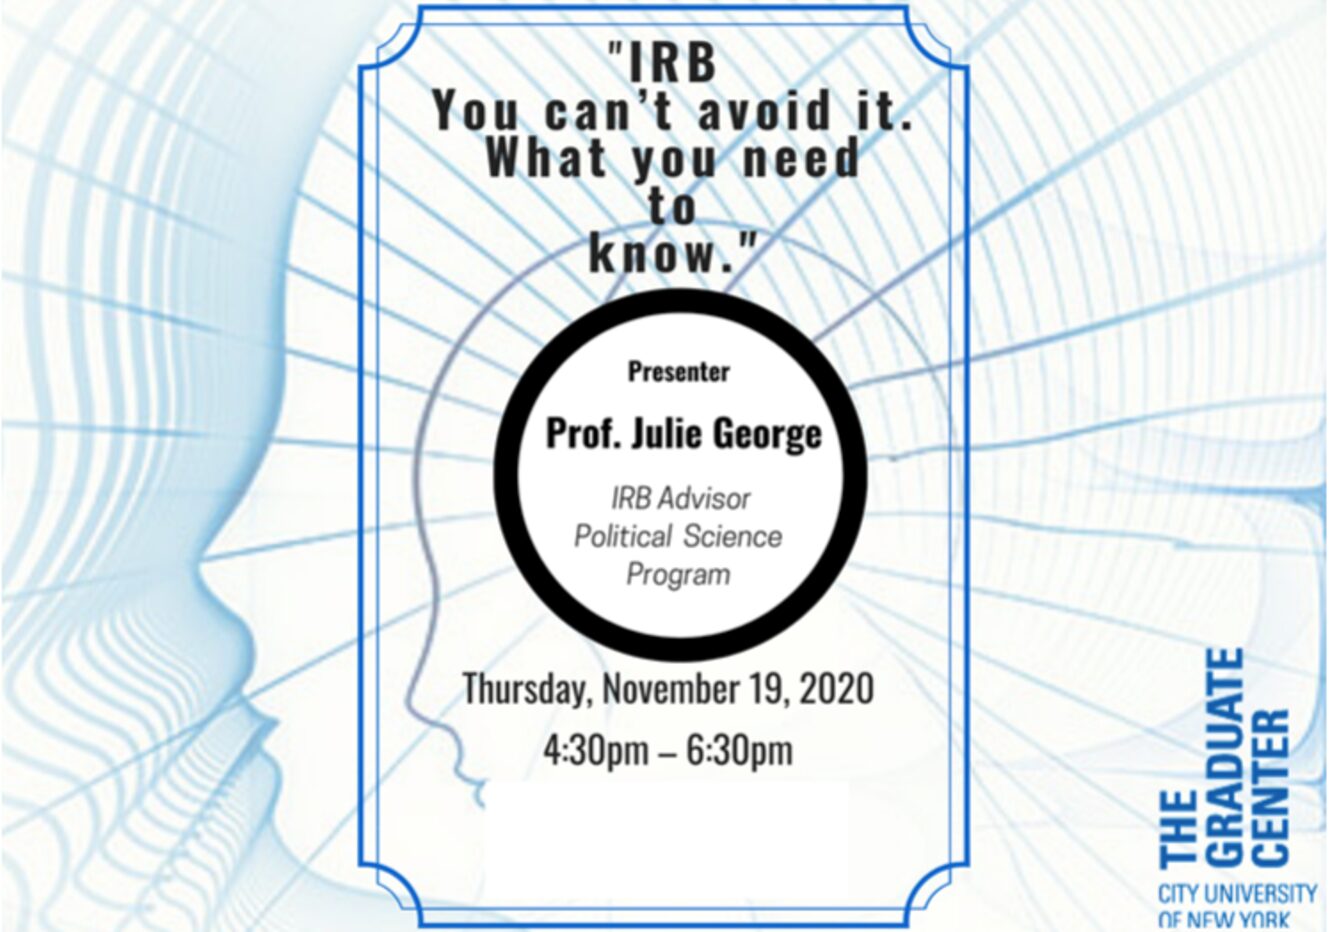 Professional Development Workshop: “IRB- You can’t avoid it.  What you need to know,” Prof. Julie George, Thursday, November 19, 4:30-6:30PM